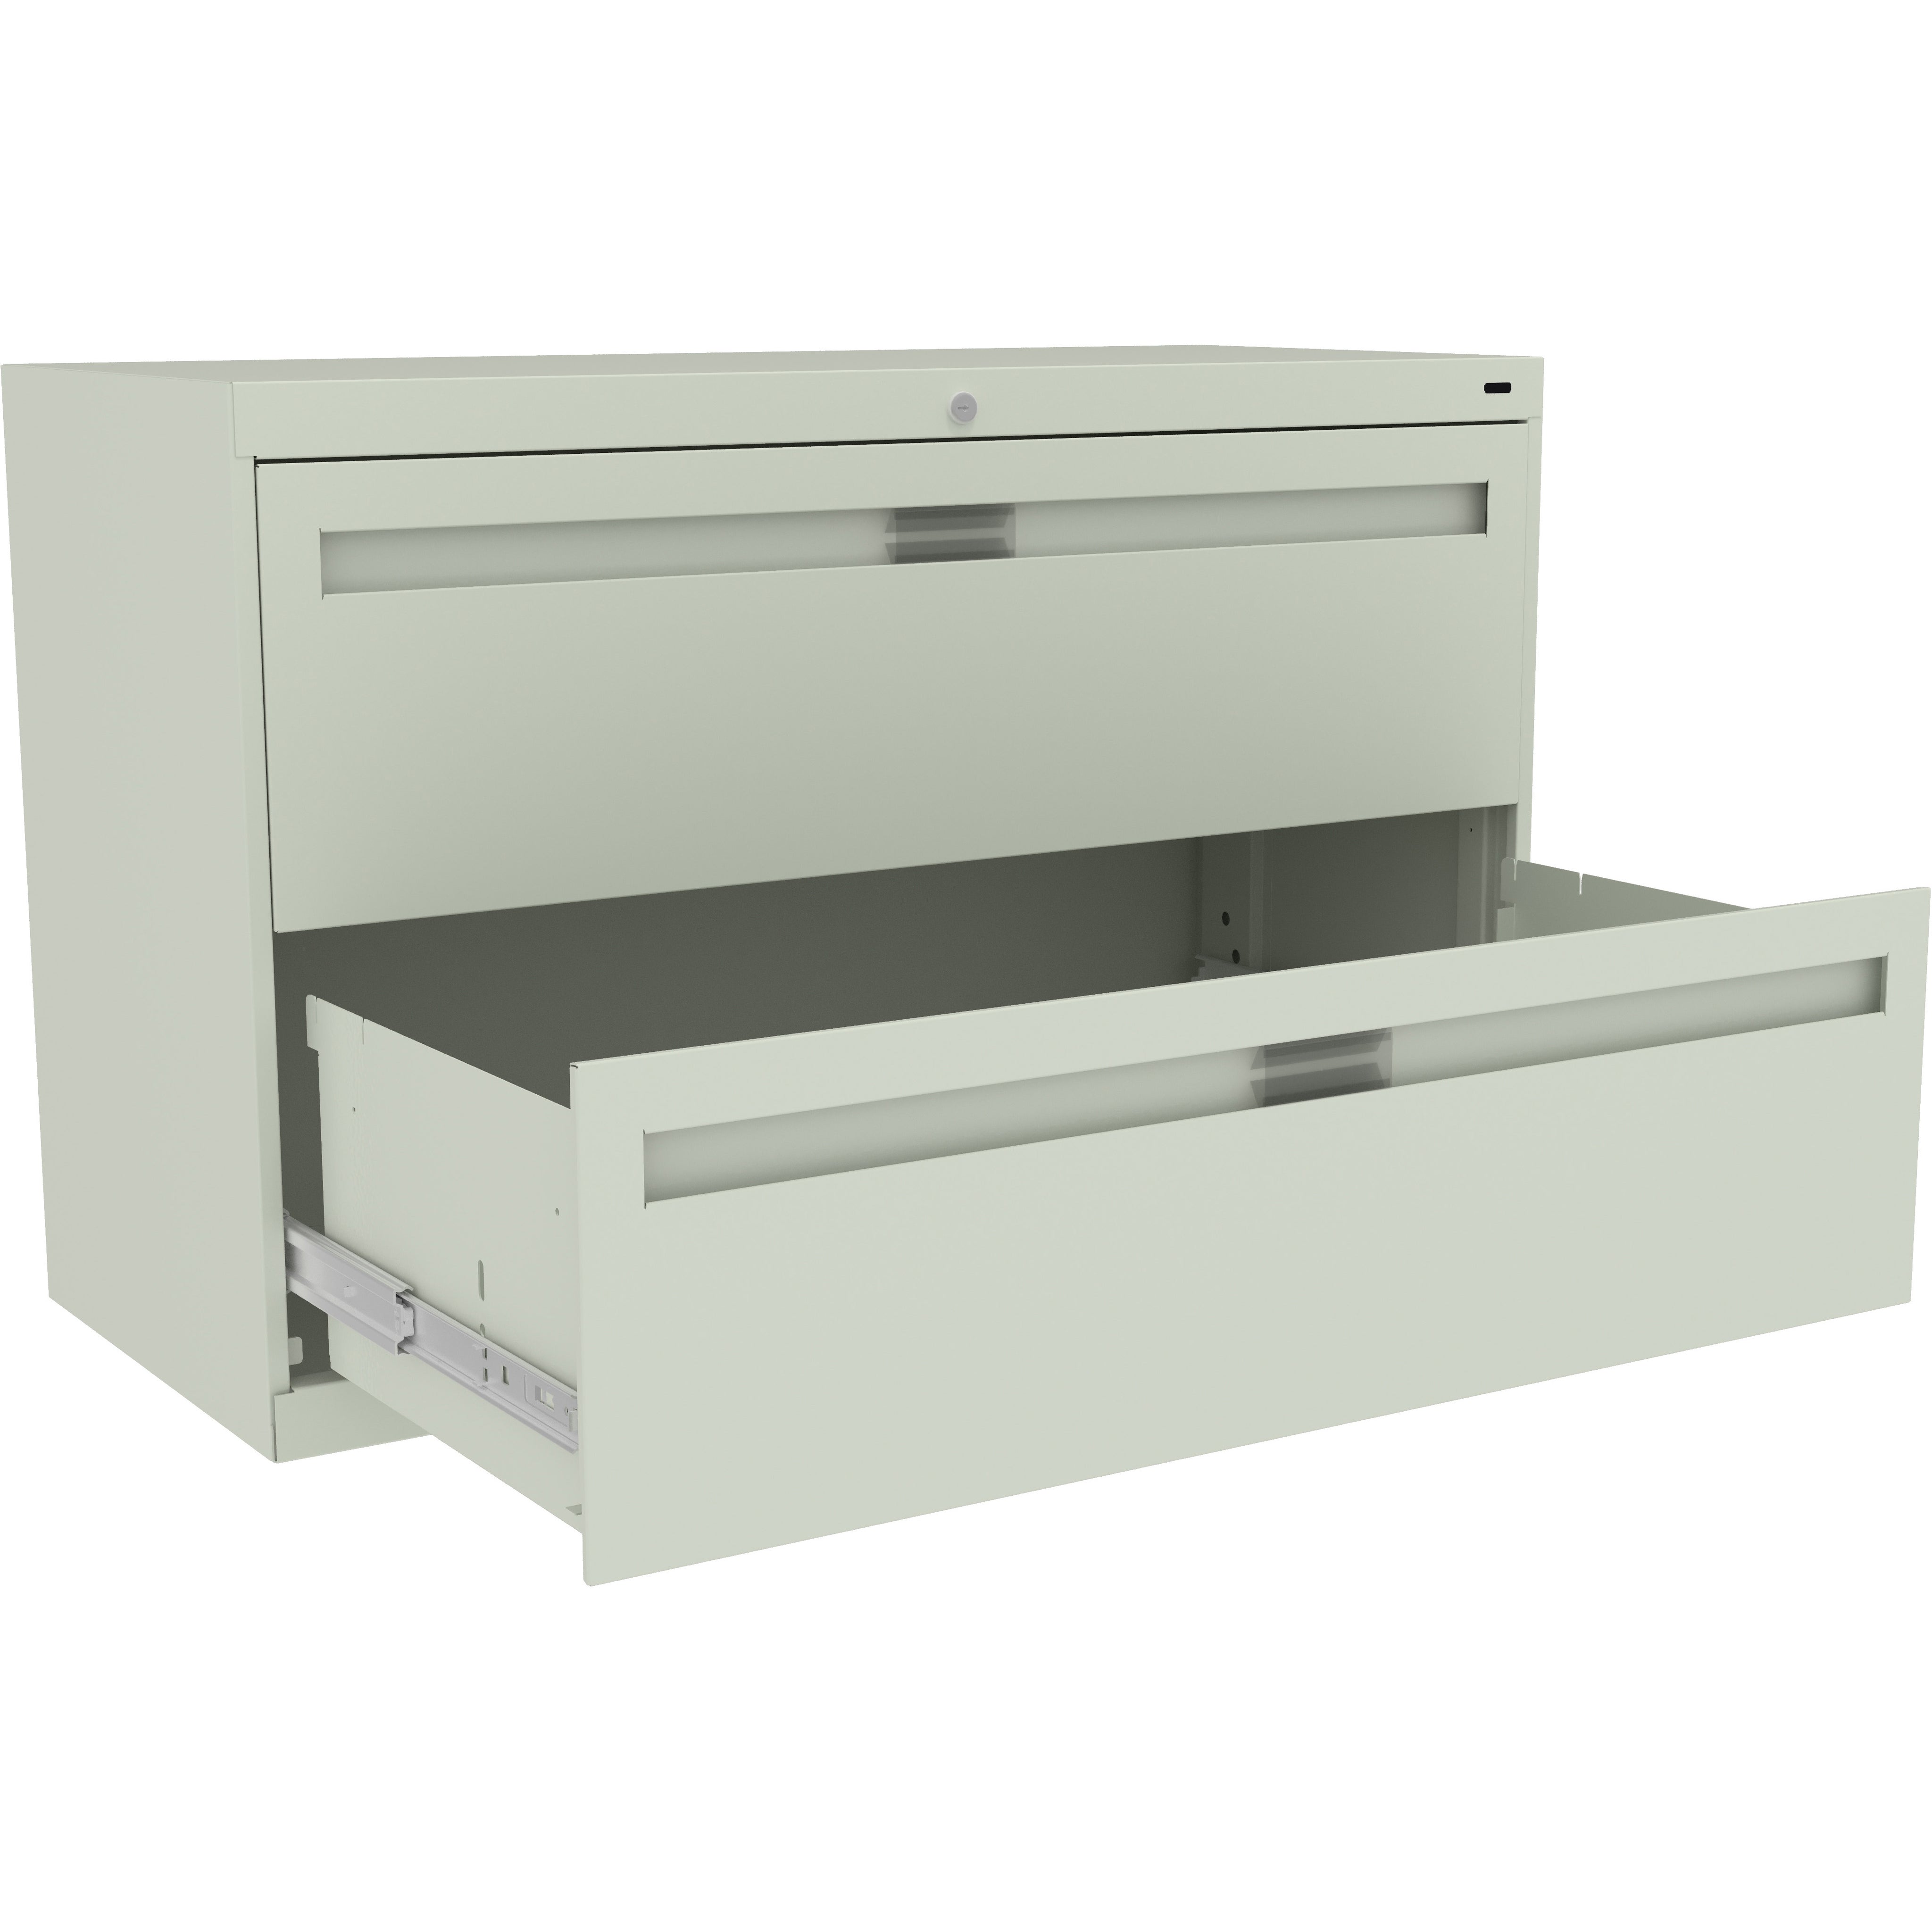 Tennsco 42" Wide Two-Drawer Lateral File with Fixed Drawer Fronts, LPL4224L20